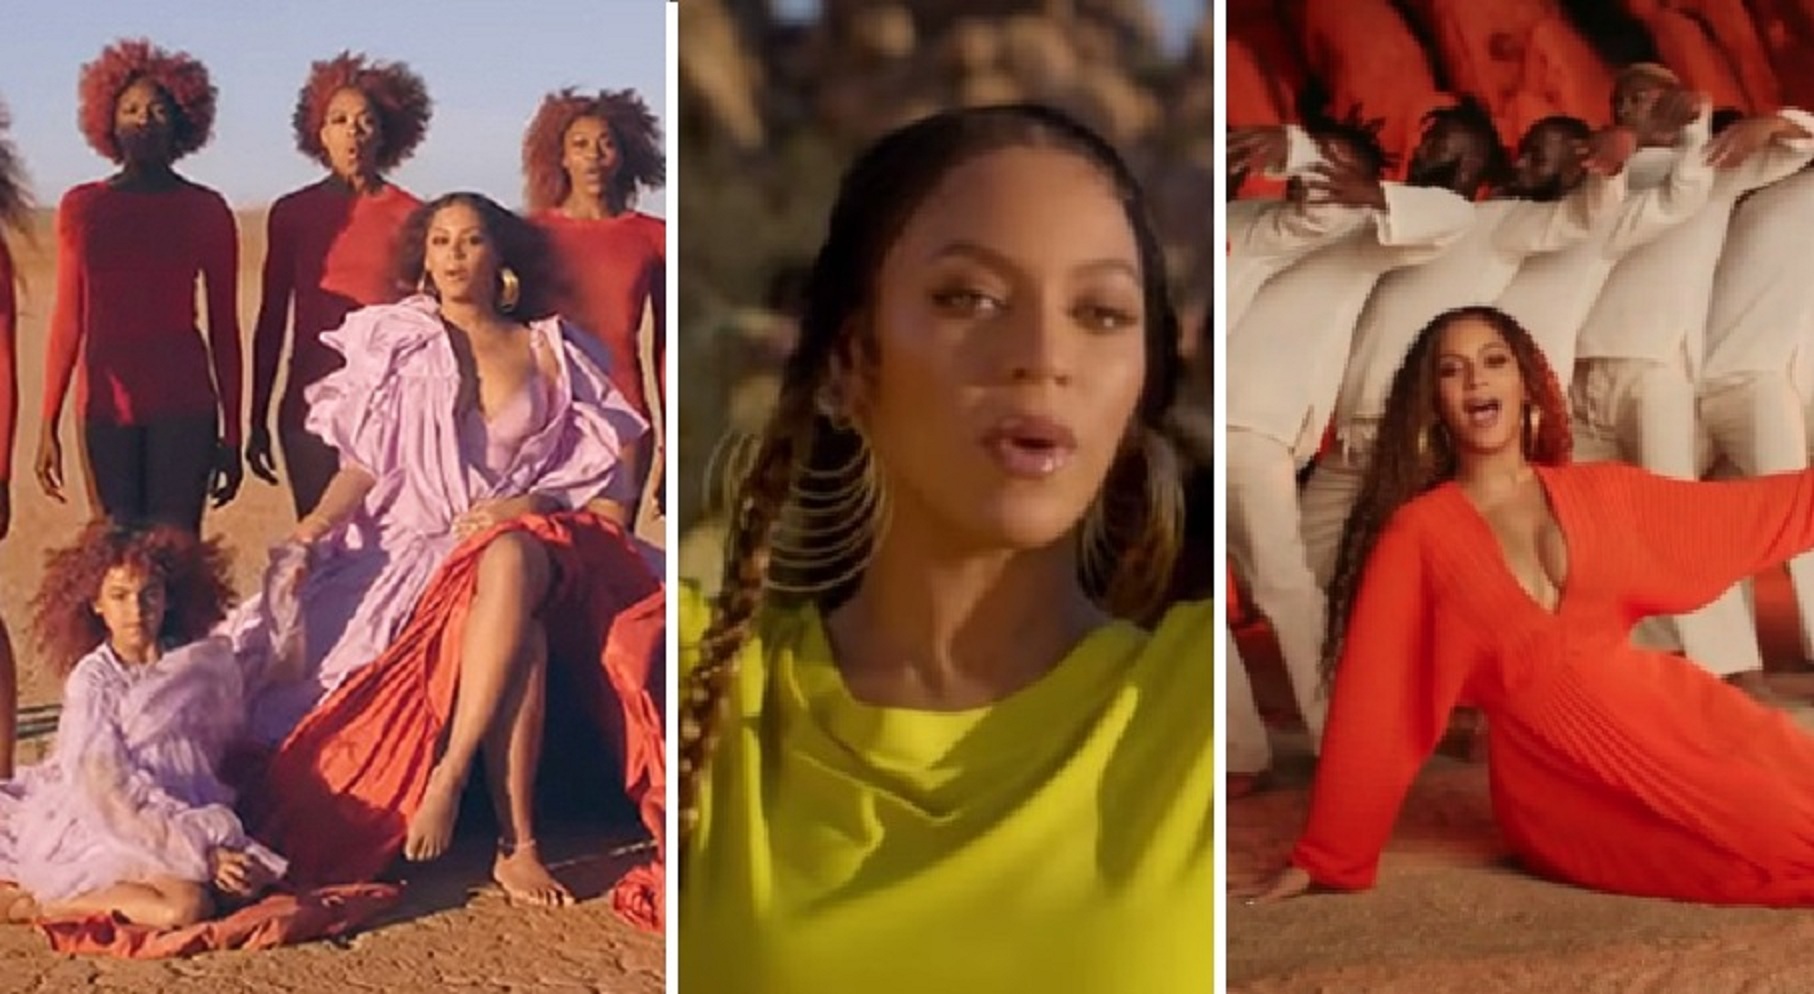 Watch: Beyonce’s NEW Music Video for ‘Spirit’ From The Lion King is Here!